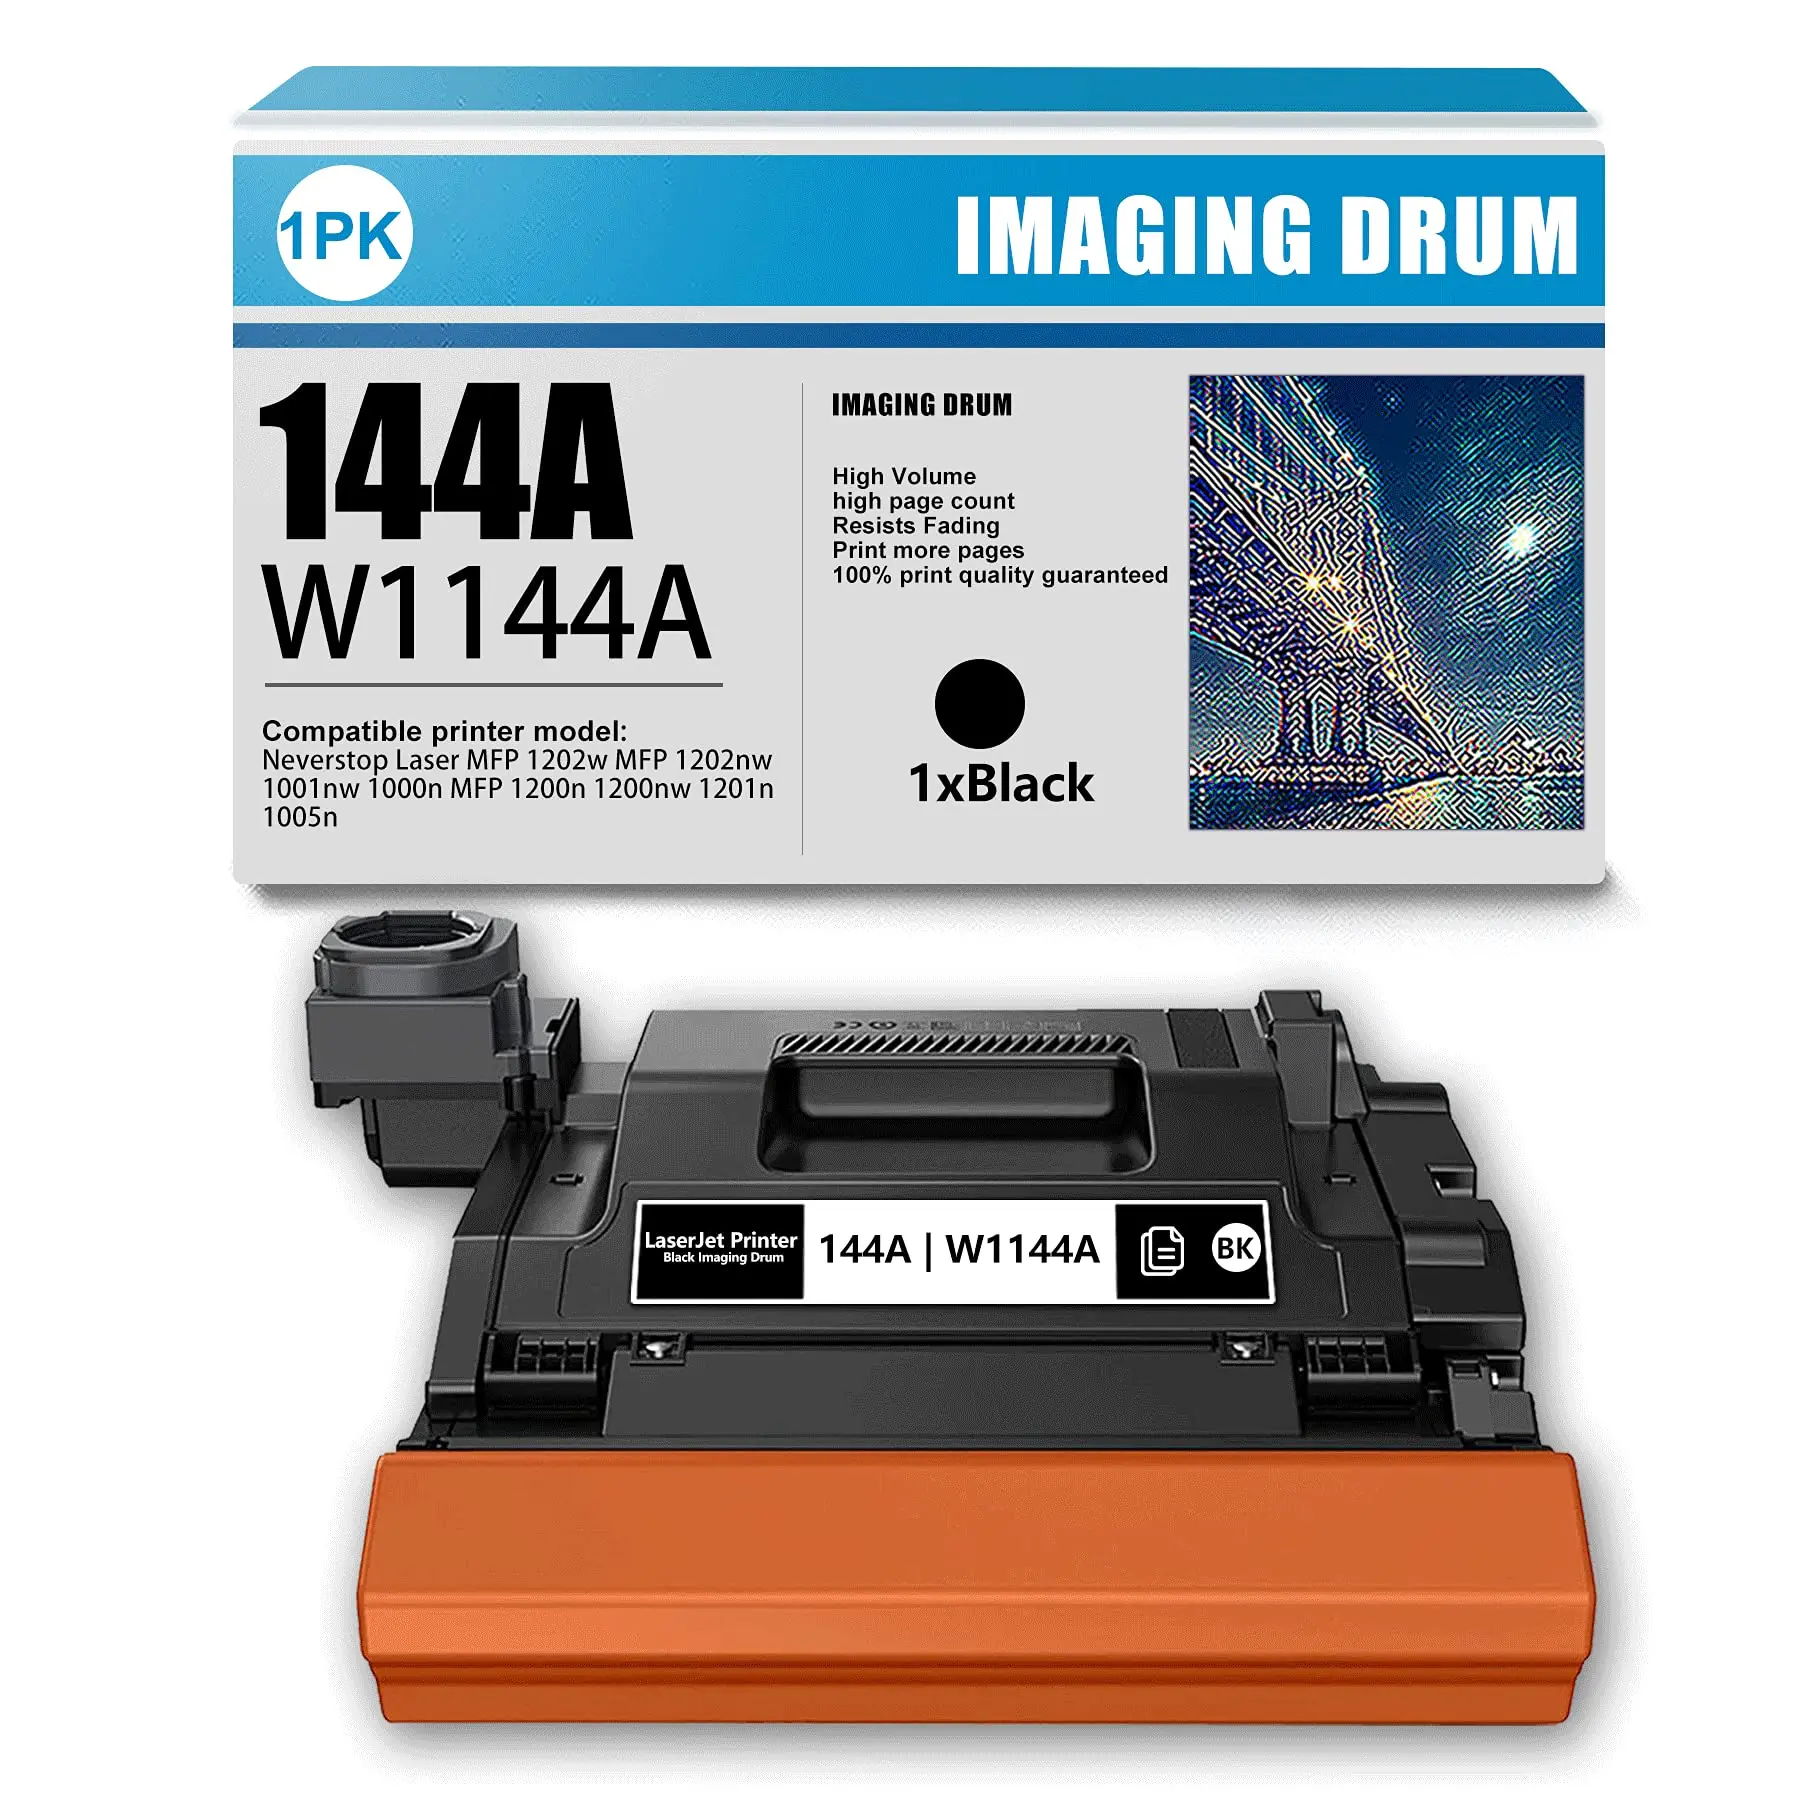 hewlett packard printers technical support imge drum - Do I need to replace imaging drum